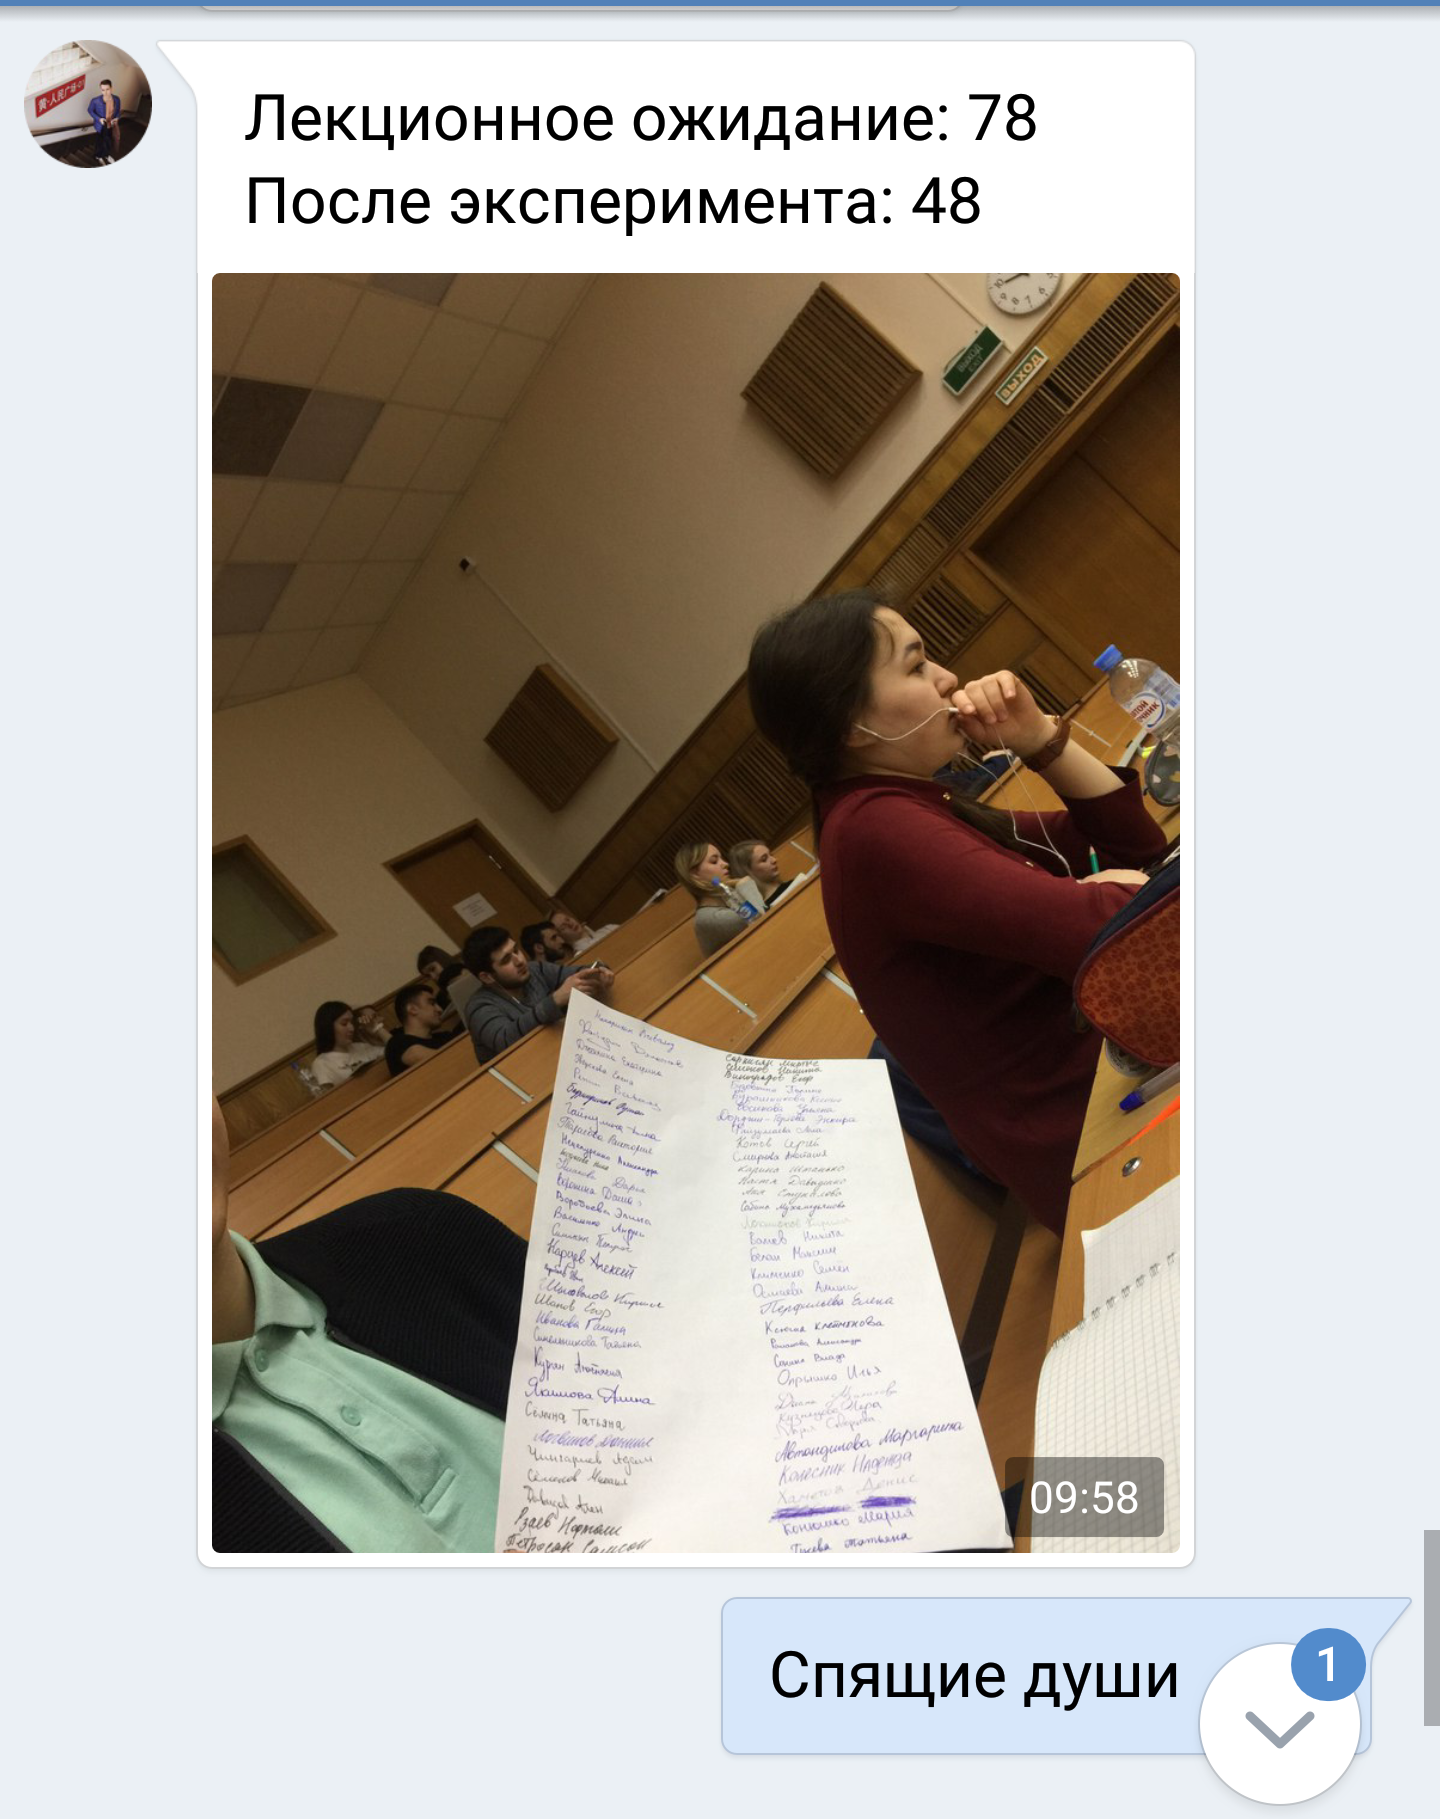 first pair) - My, Institute, First pair, Lecture, MGIMO